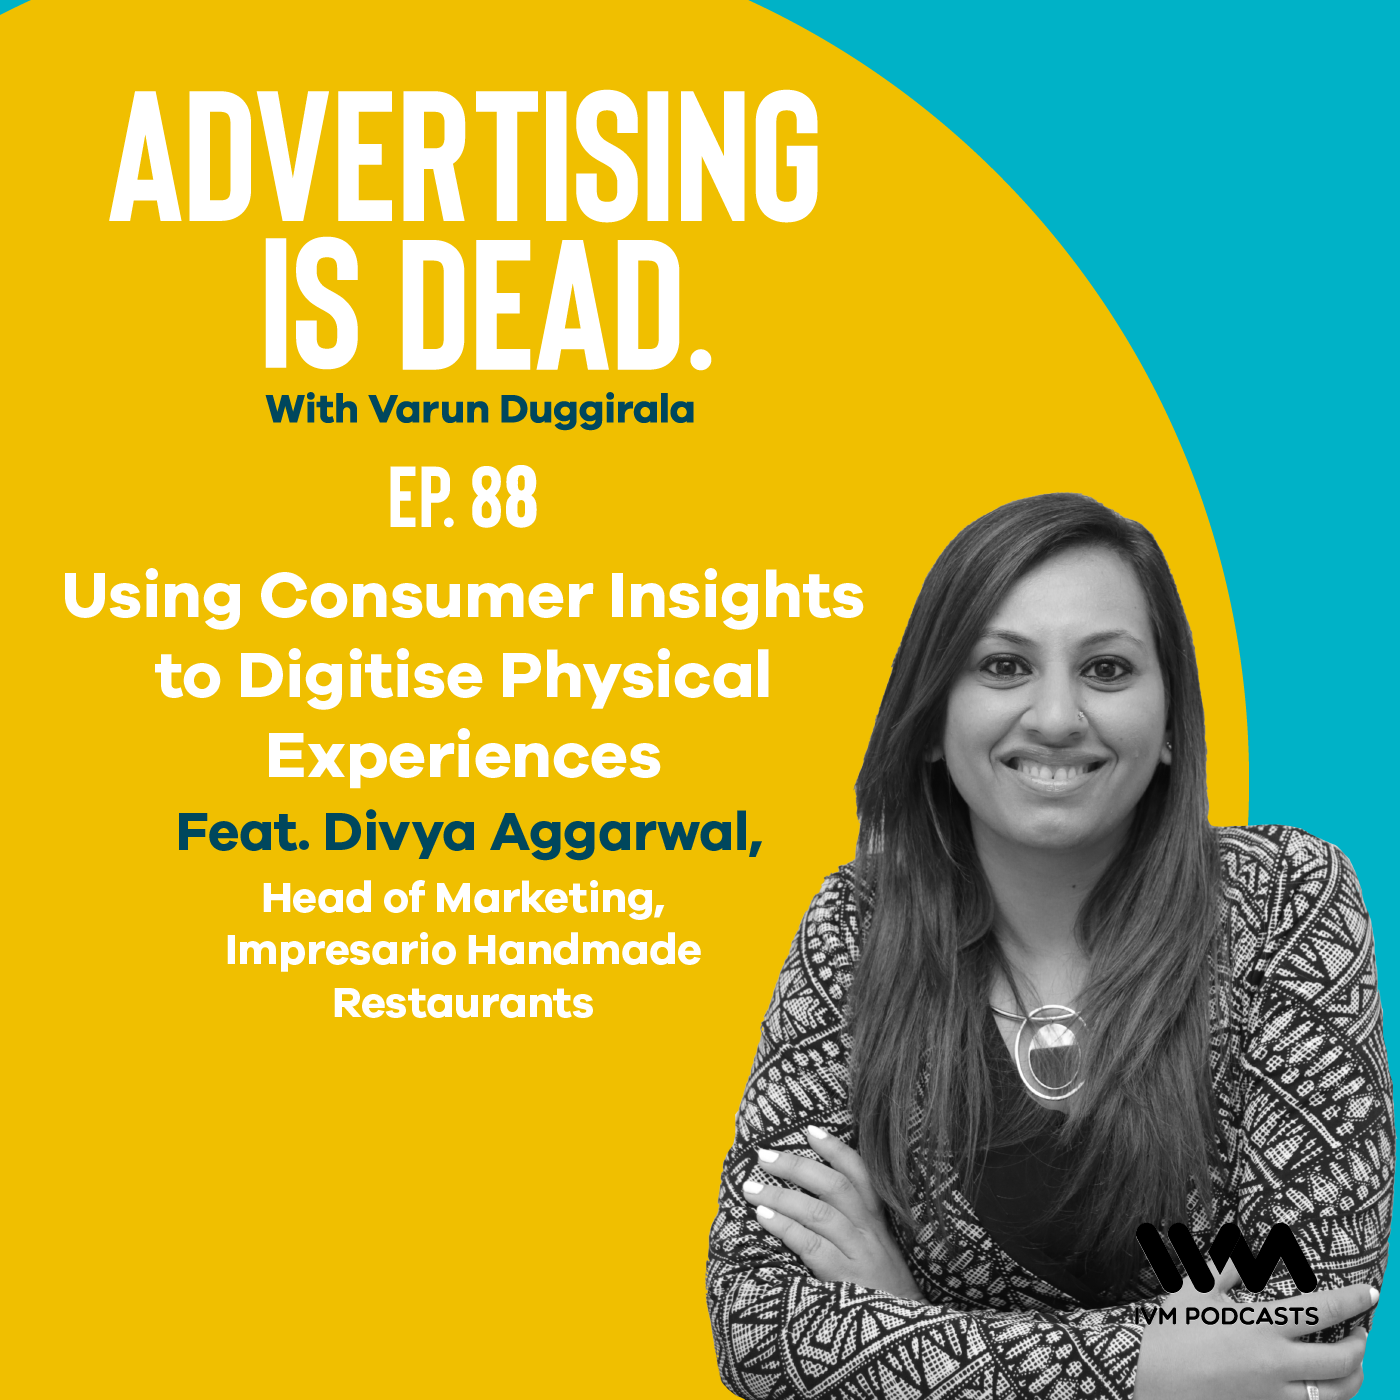 Divya Aggarwal on Using Consumer Insights to Digitise Physical Experiences